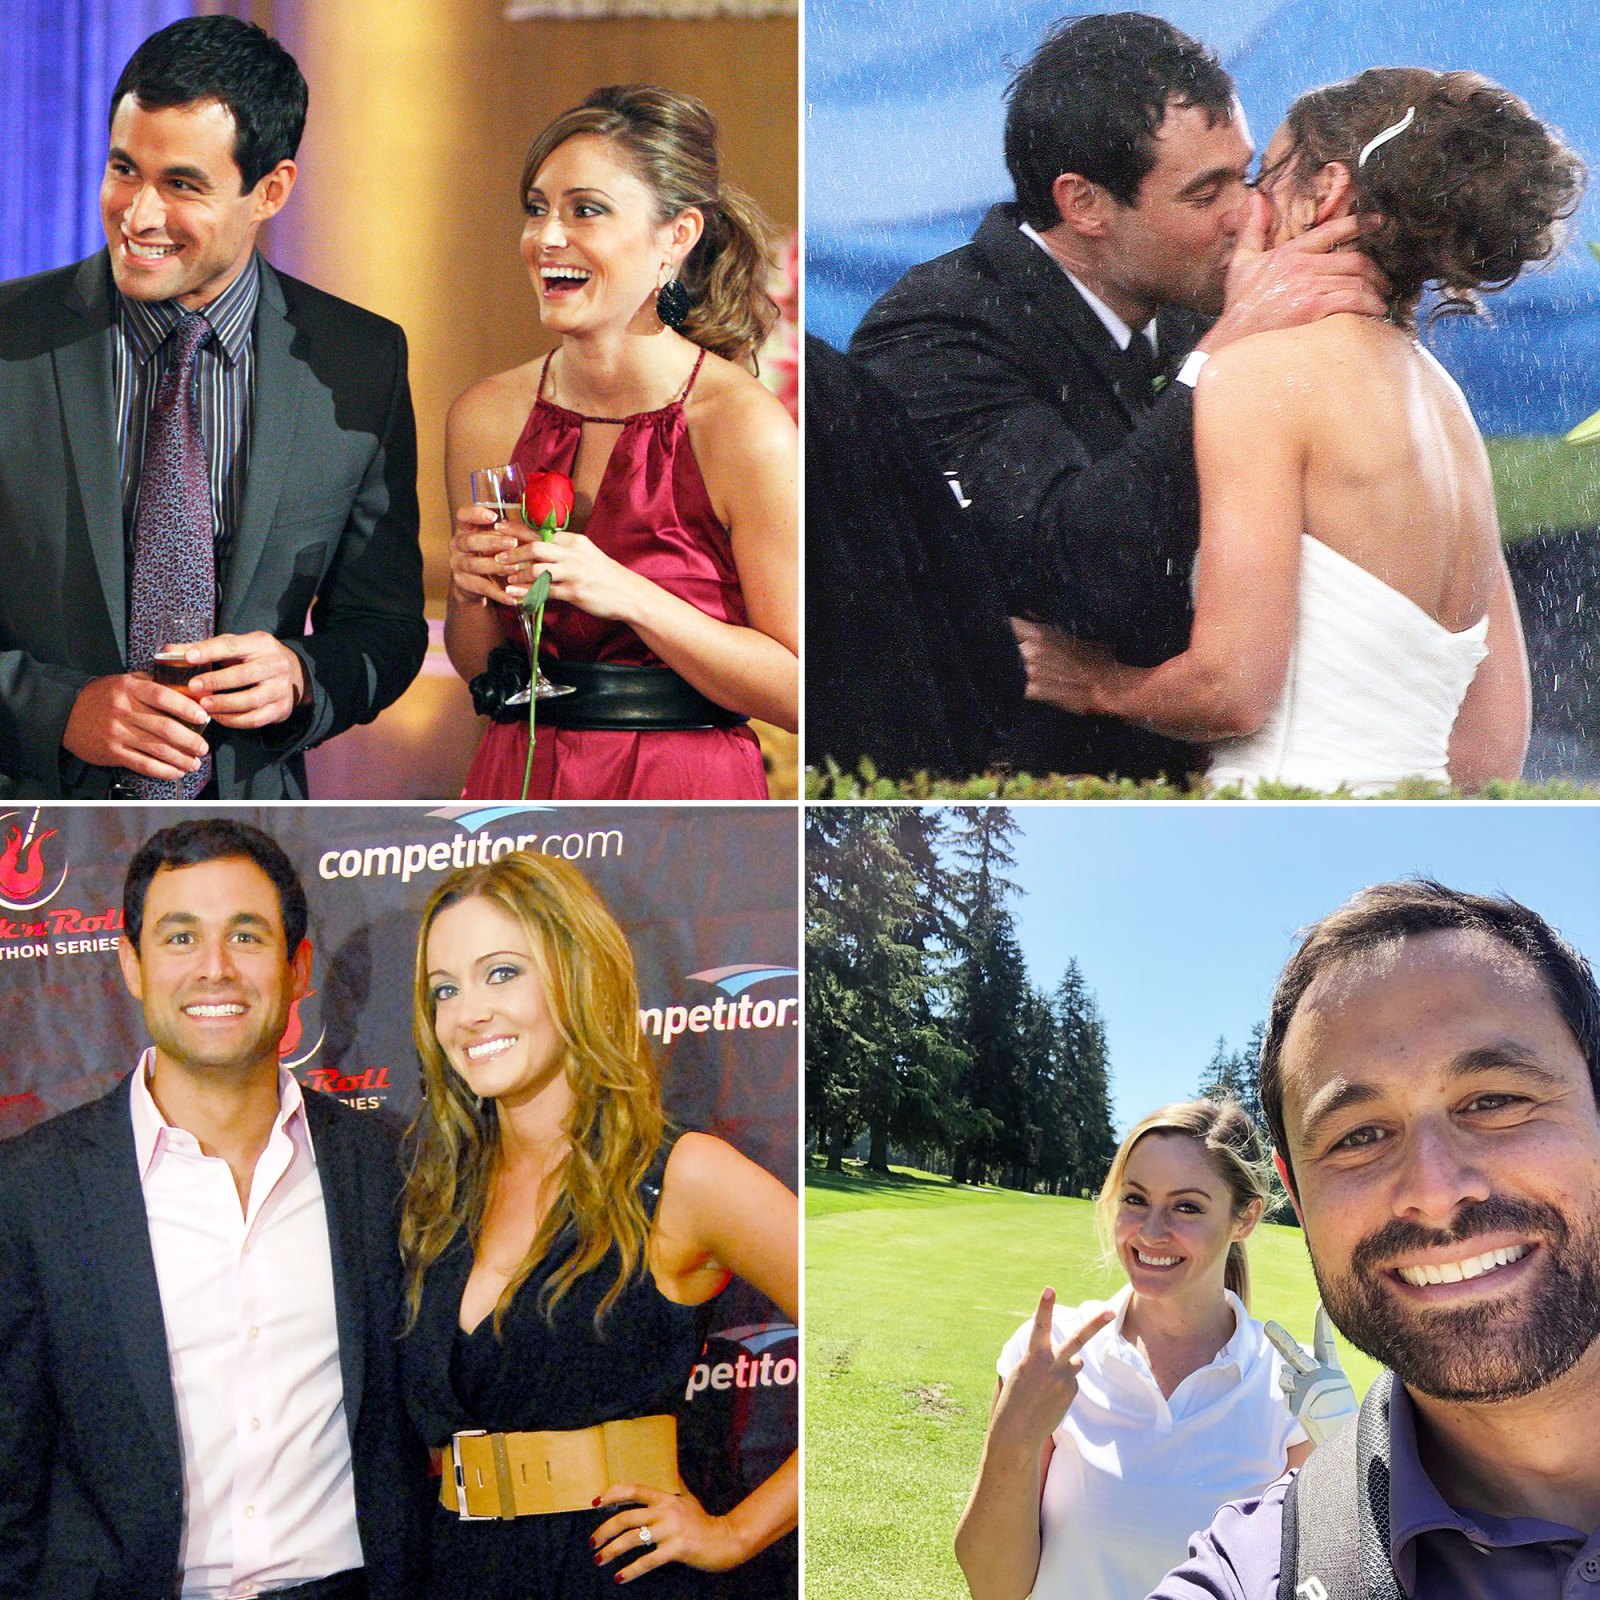 Jason Mesnick and Molly Malaney Unconventional Bachelor Love Story